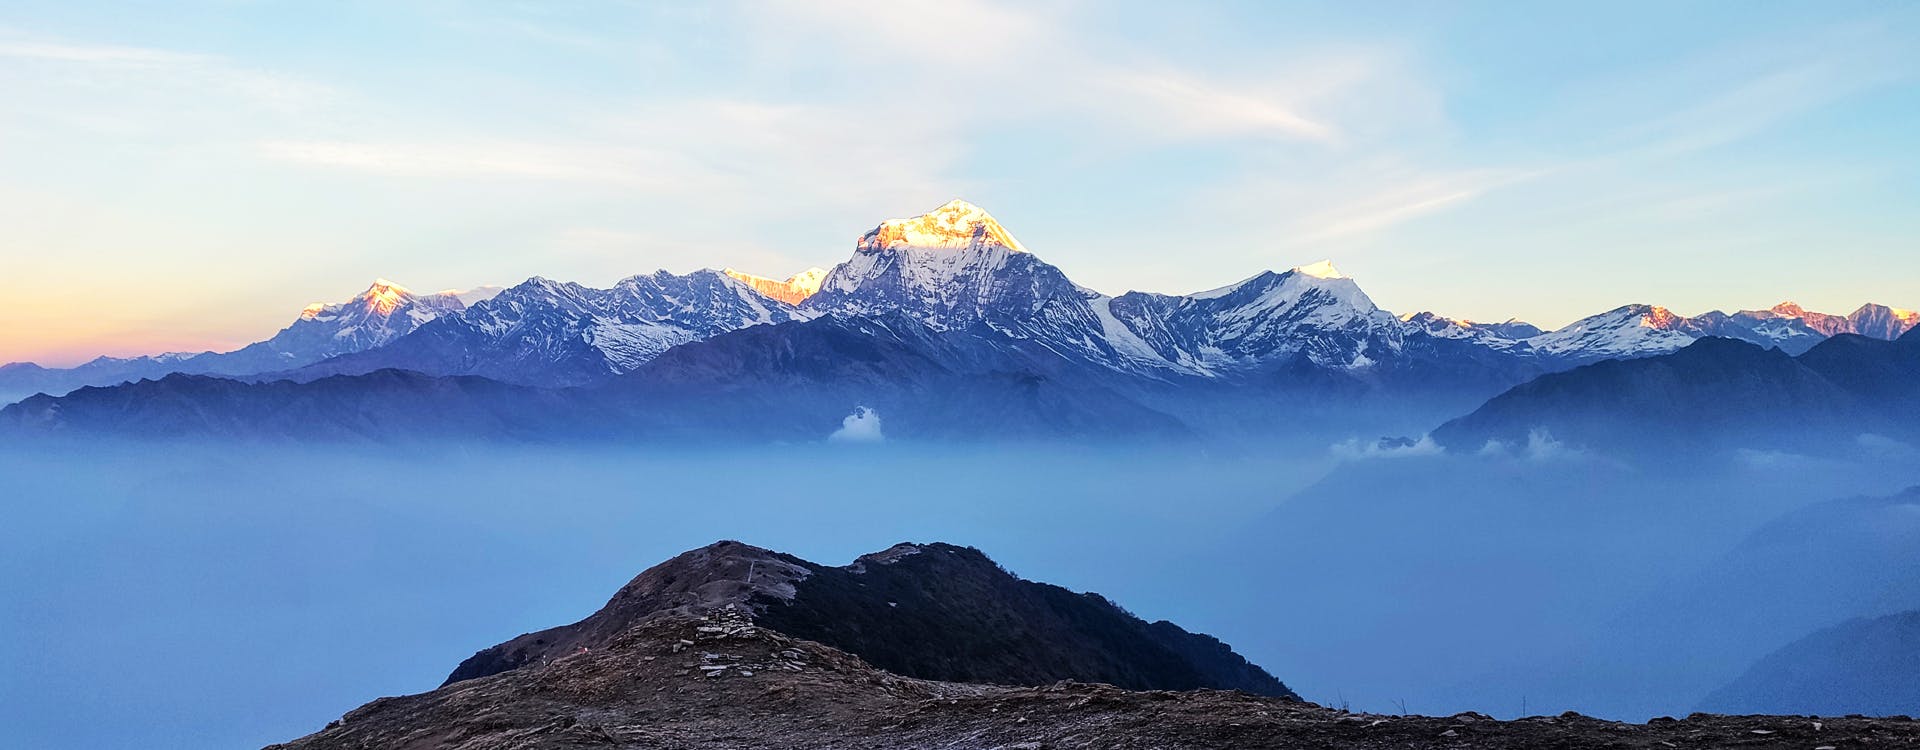 Discover the secluded trails and breathtaking views of the Khopra Ridge Trek, featuring majestic Himalayan peaks and serene landscapes